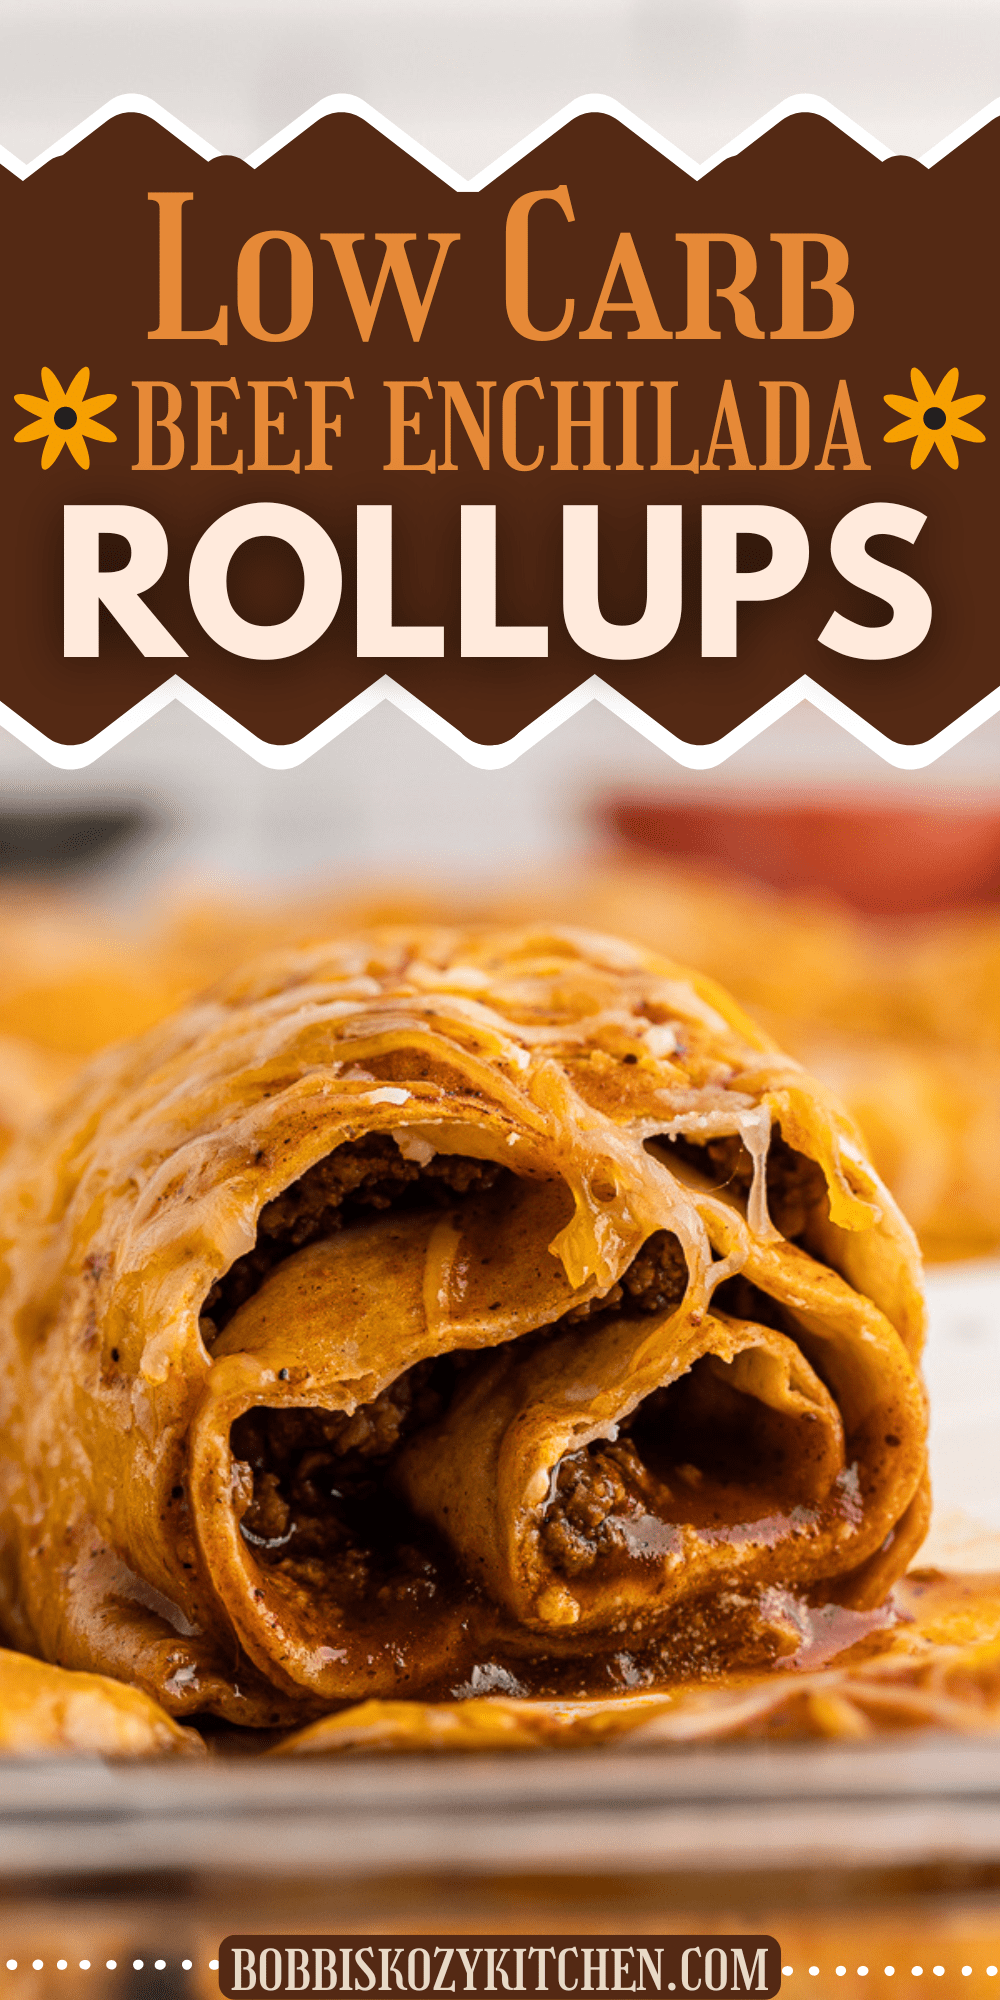 Pinterest graphic with image of Low Carb Beef Enchilada Rollups on it.